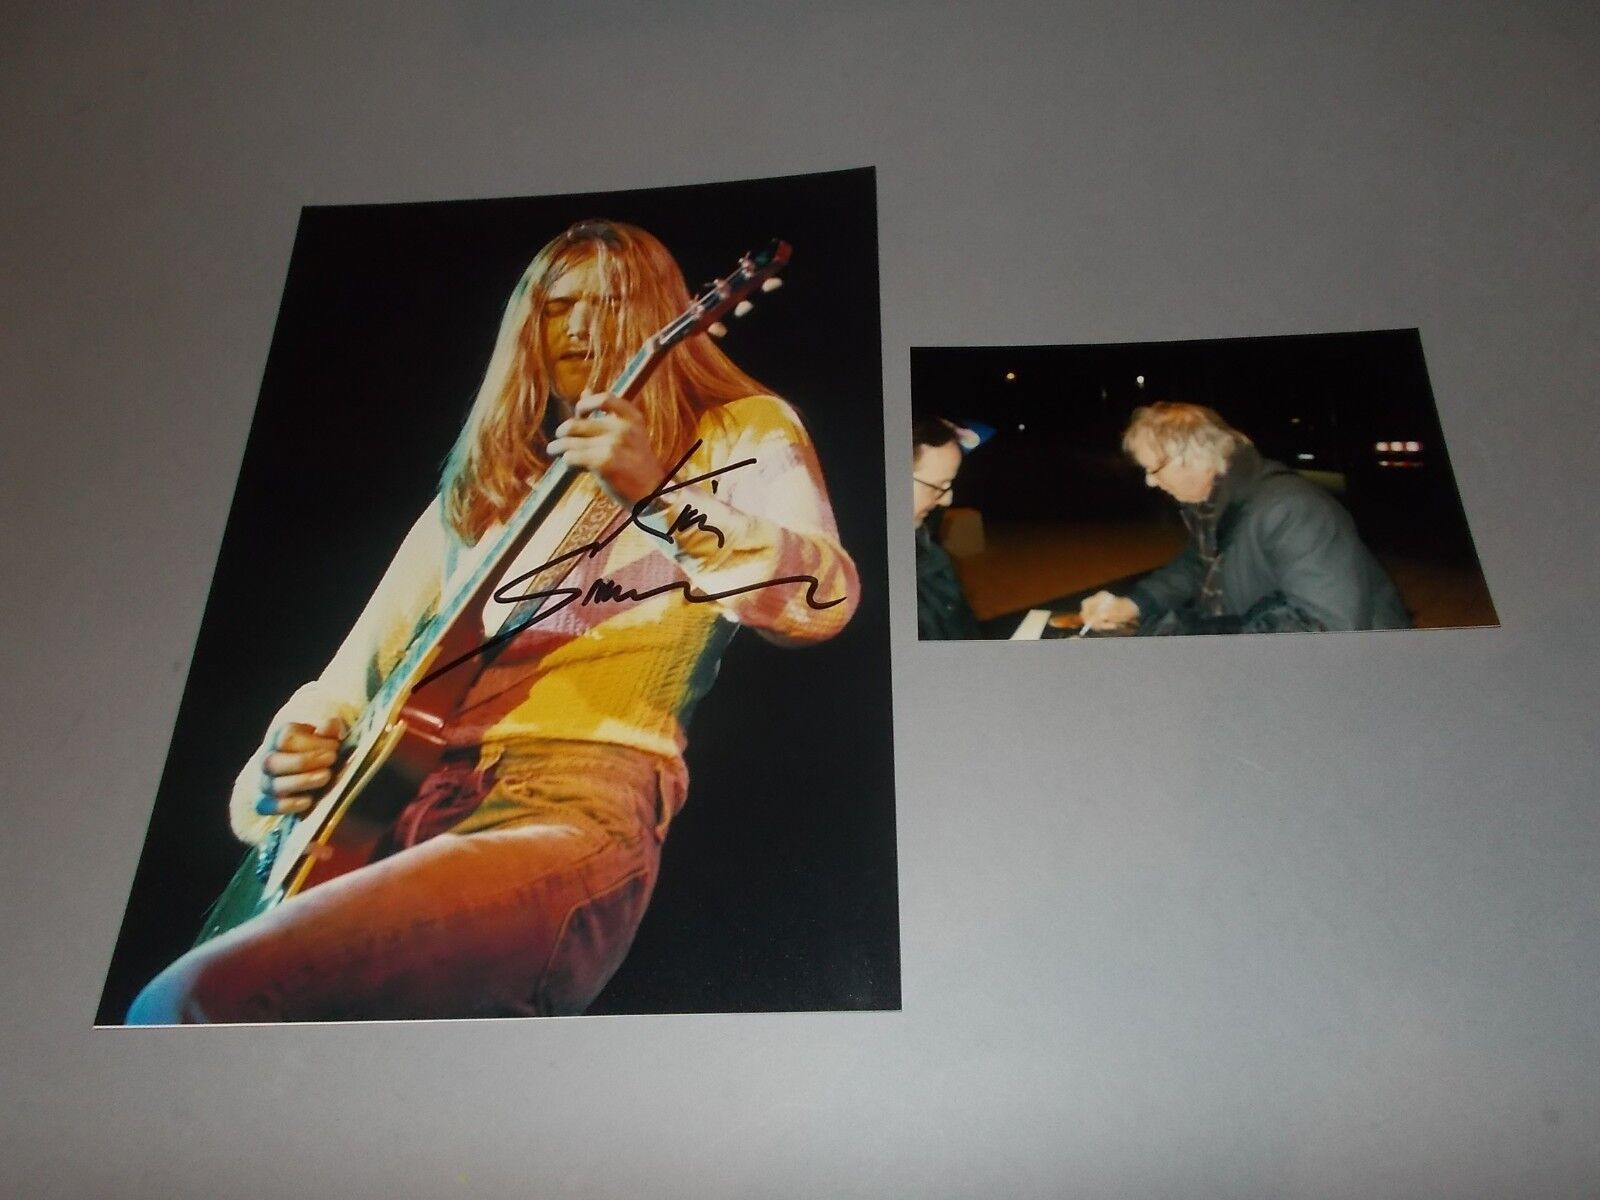 Kim Simmonds Savoy Brown  signed autograph Autogramm 8x11 photo in person